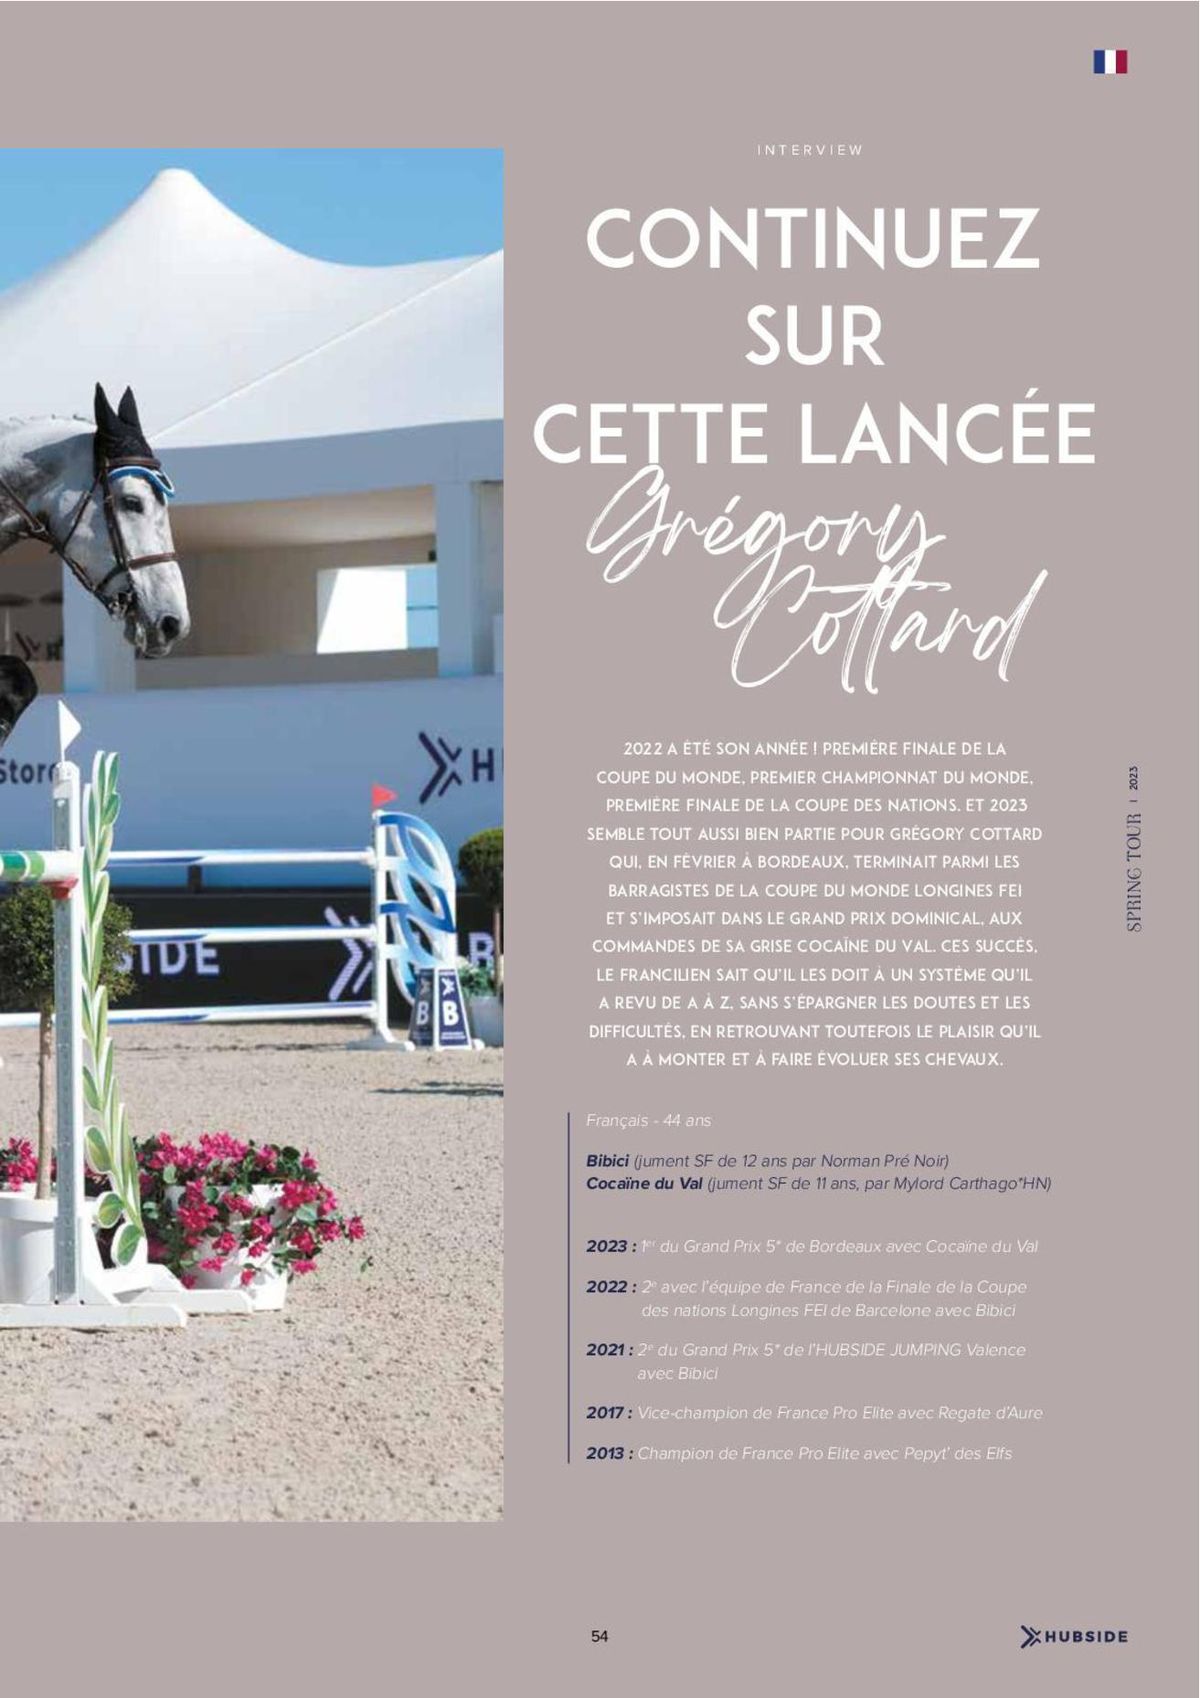 Catalogue Magazine HUBSIDE jumping Grimaud Spring Tour 2023, page 00054